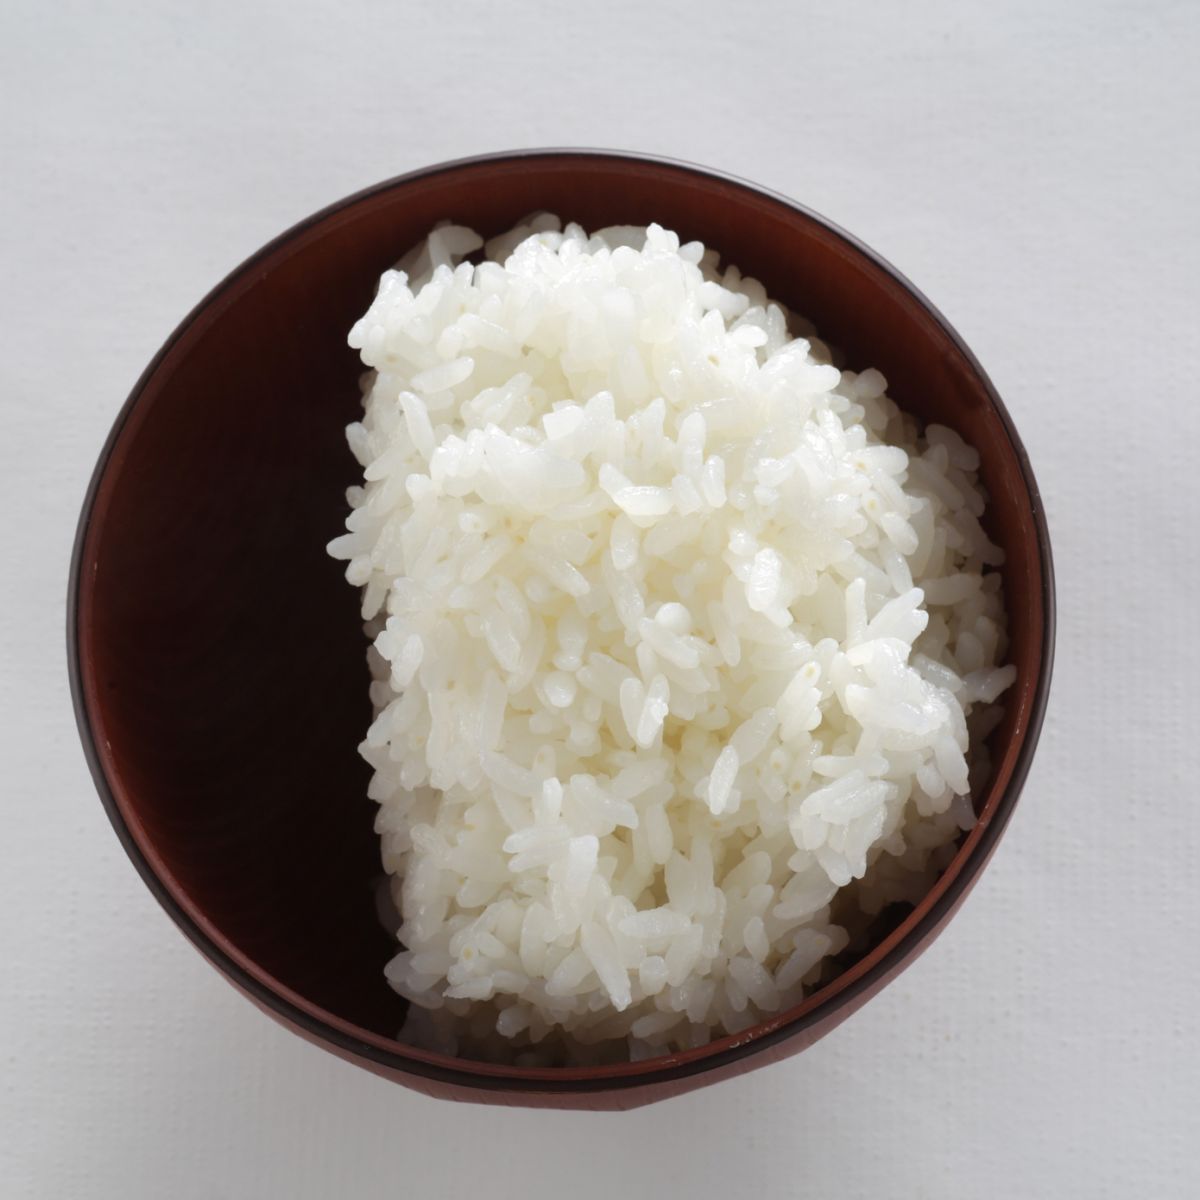 Small Portion of Rice